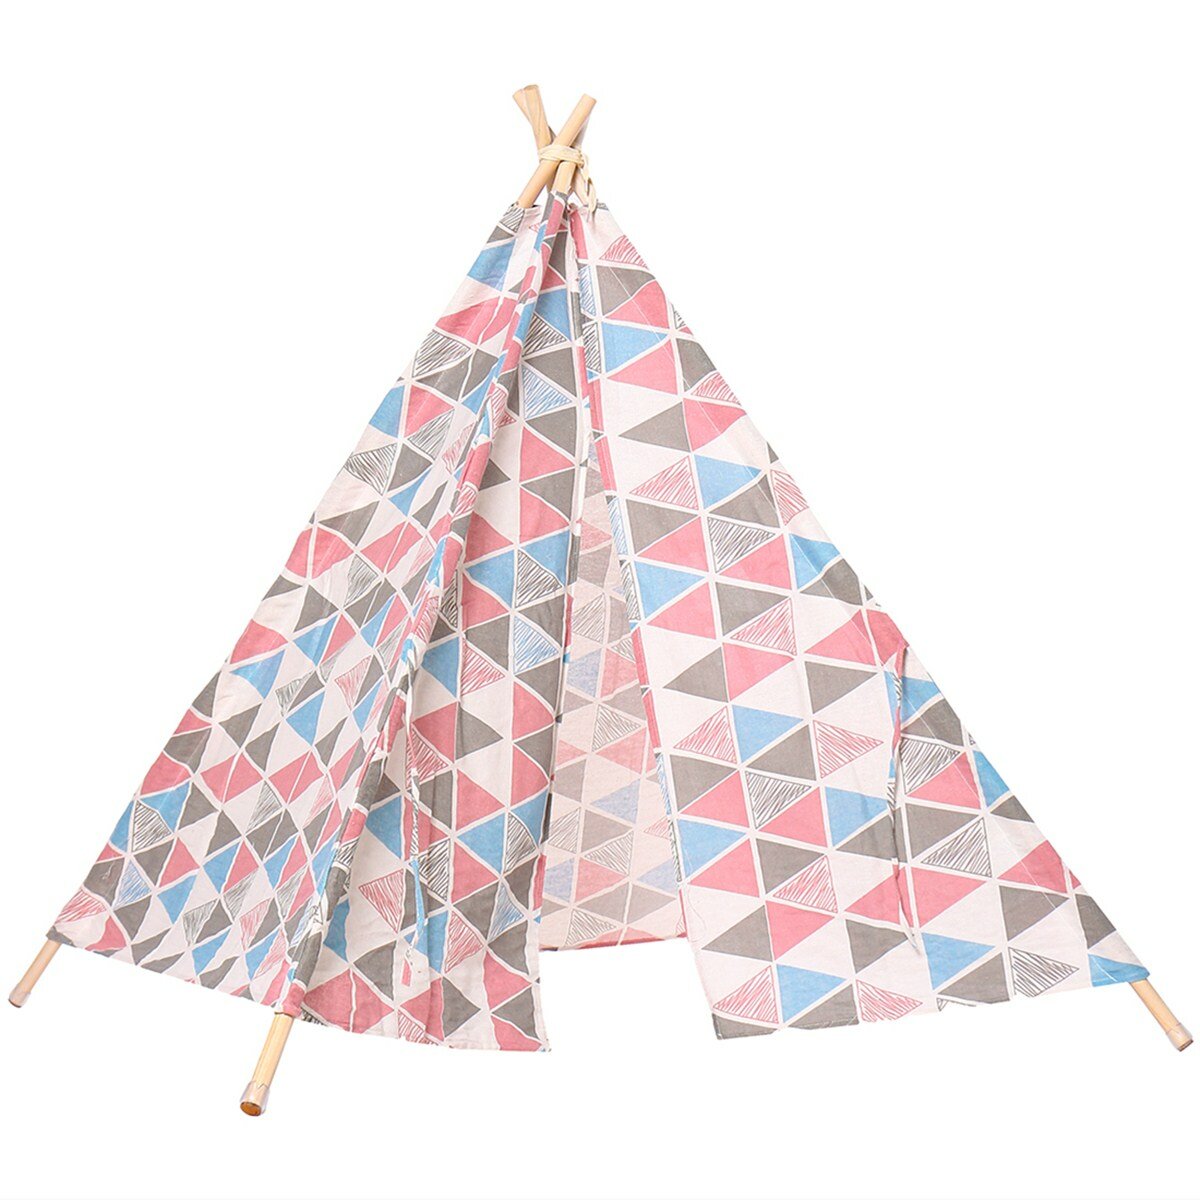 

Large Cotton Linen Kids Play Tent Teepee Canvas Playhouse Indian Wigwam